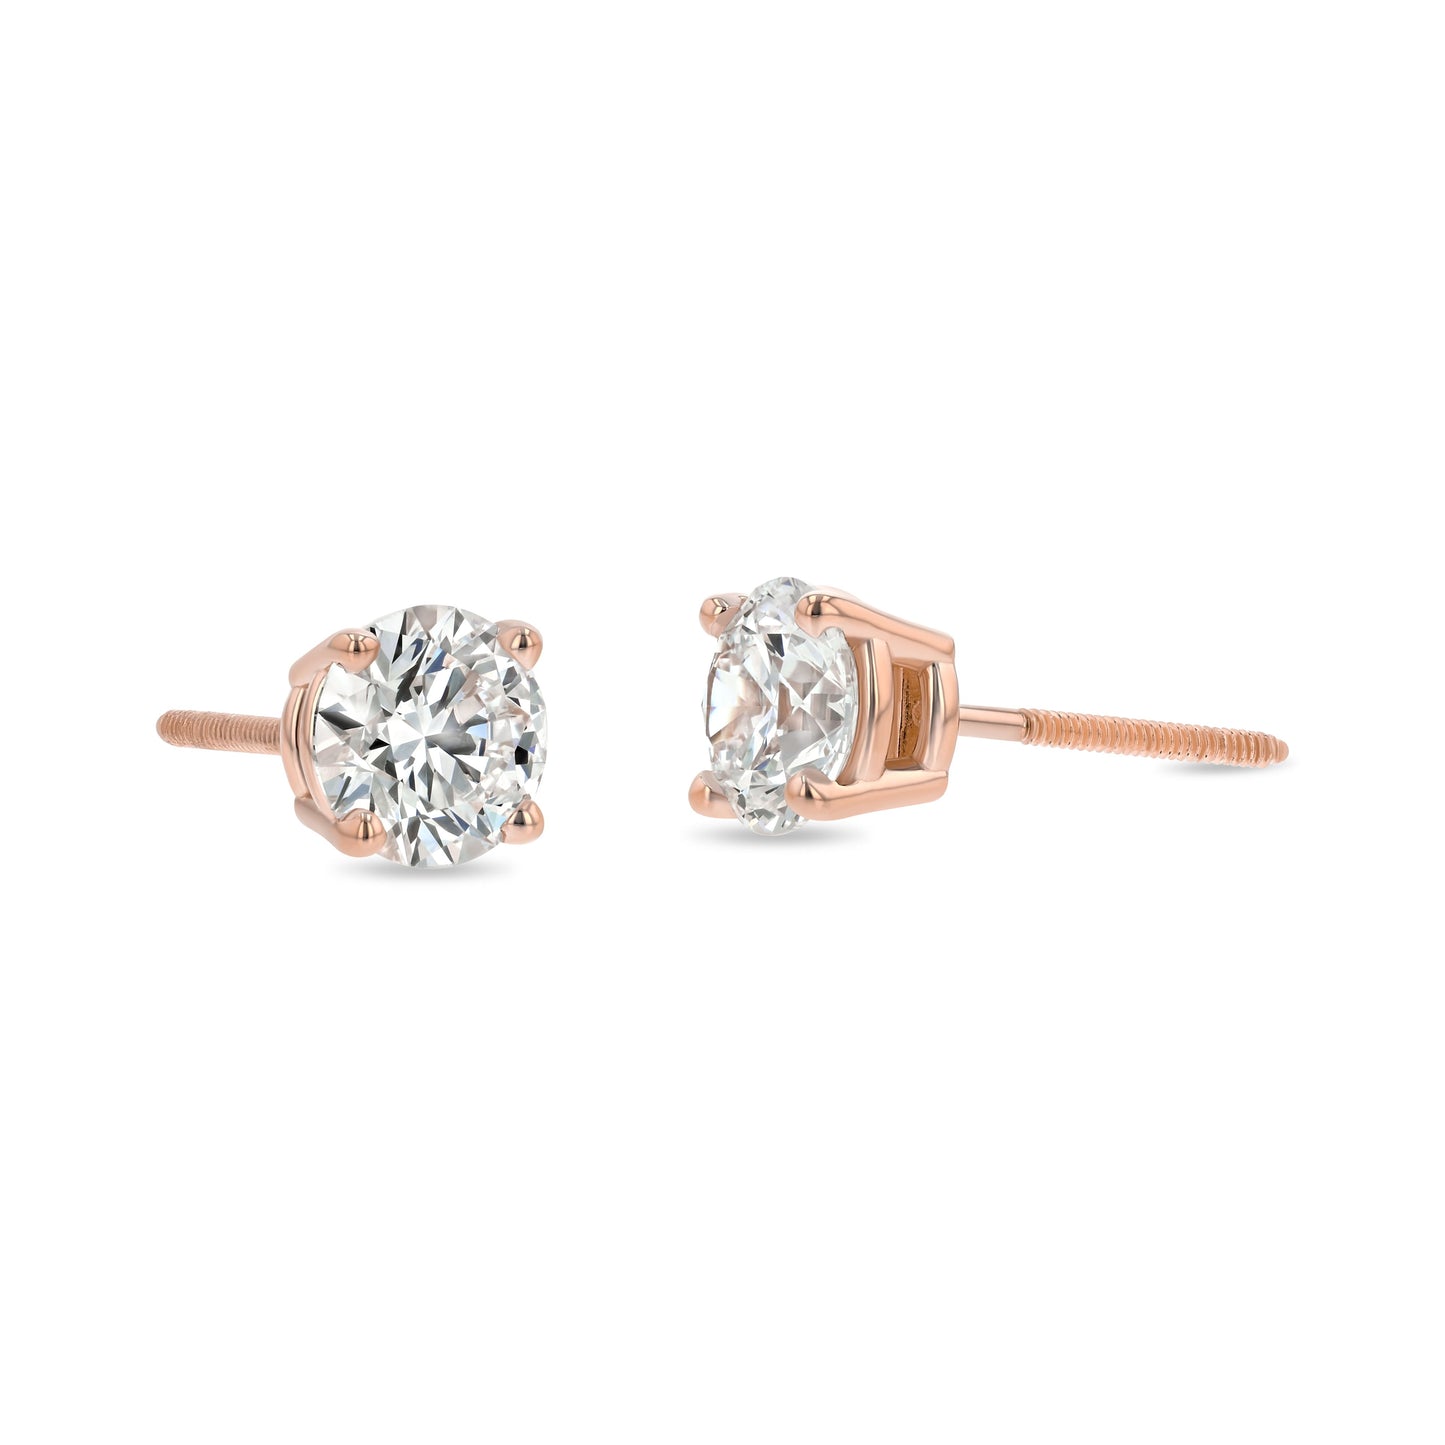 14k Rose Gold 4-prong Round Diamond Stud Earrings 1/2ctw (4.0mm Ea), M-n Color, Si2-si3 Clarity